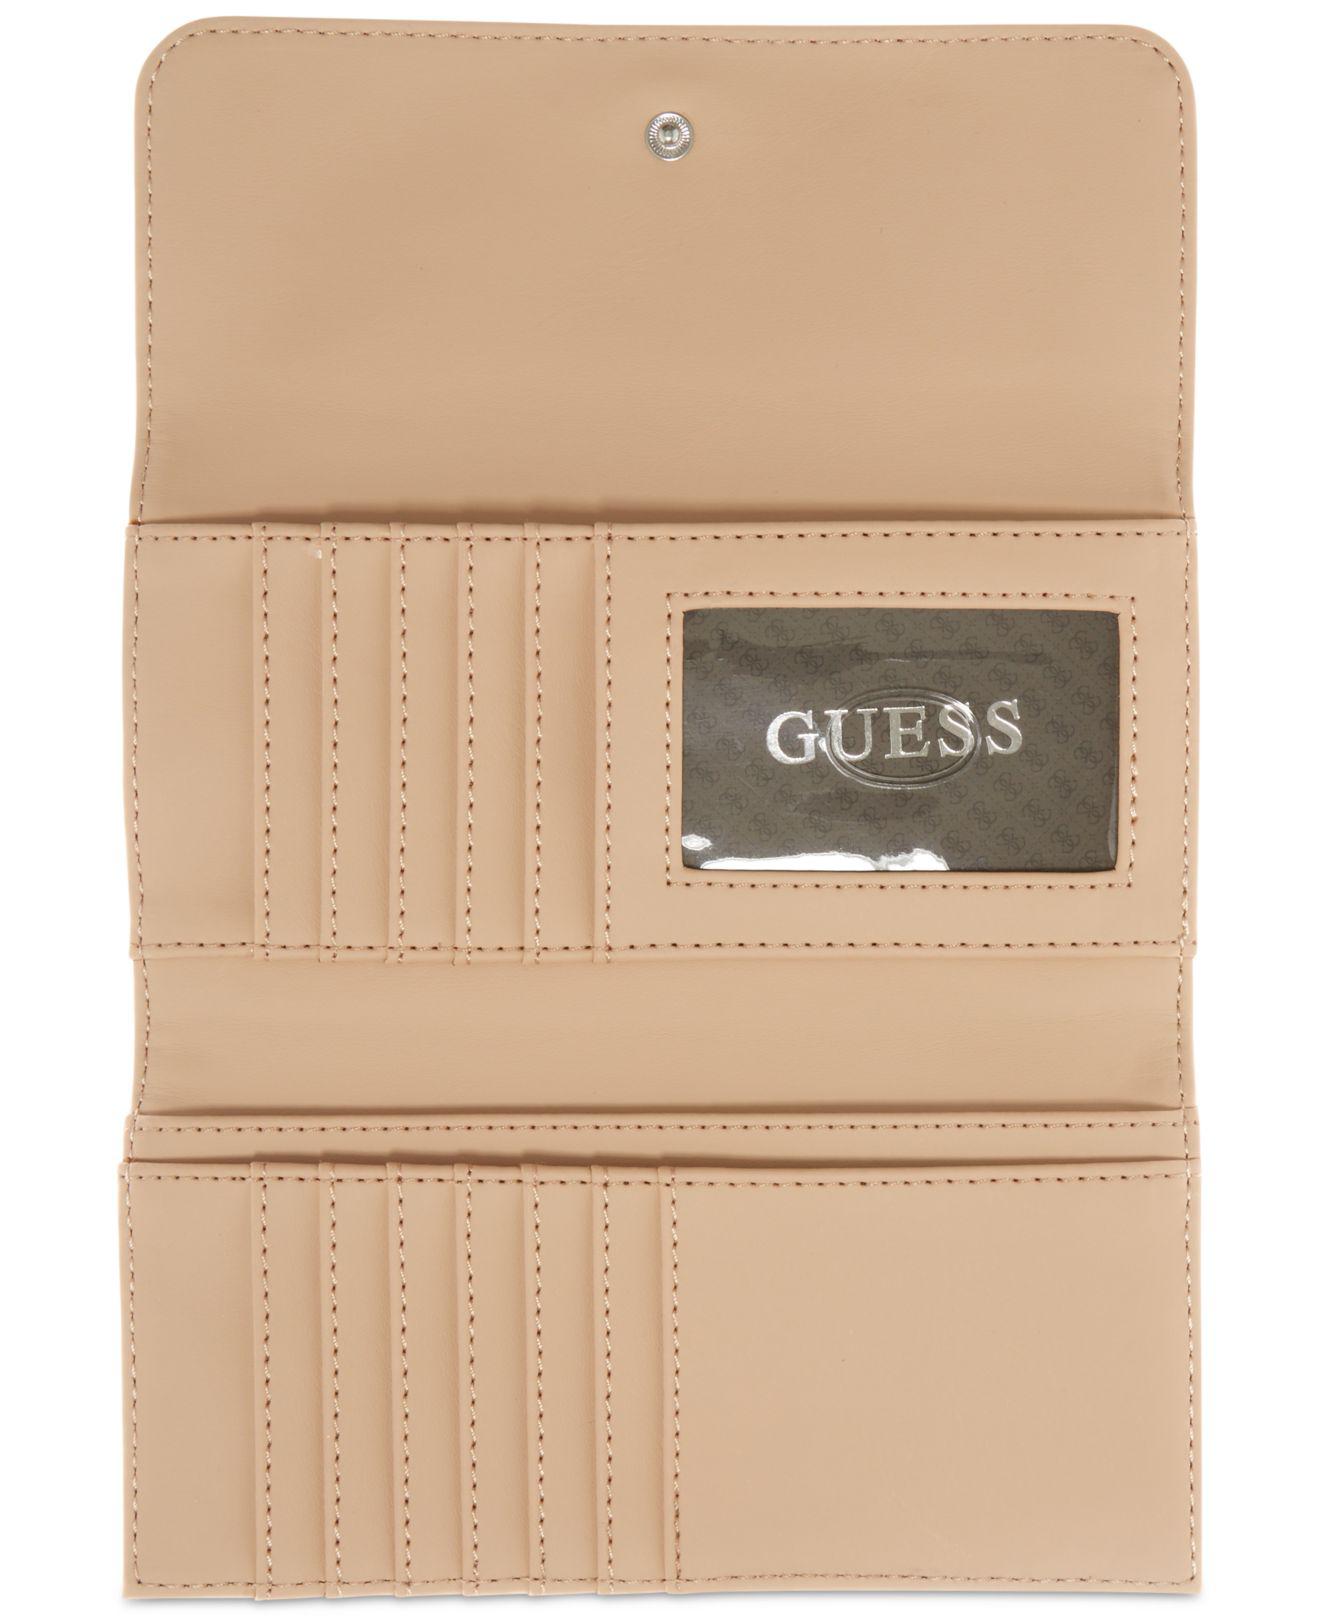 Guess Halley Slim Clutch Wallet in Pink (Pink) - Lyst